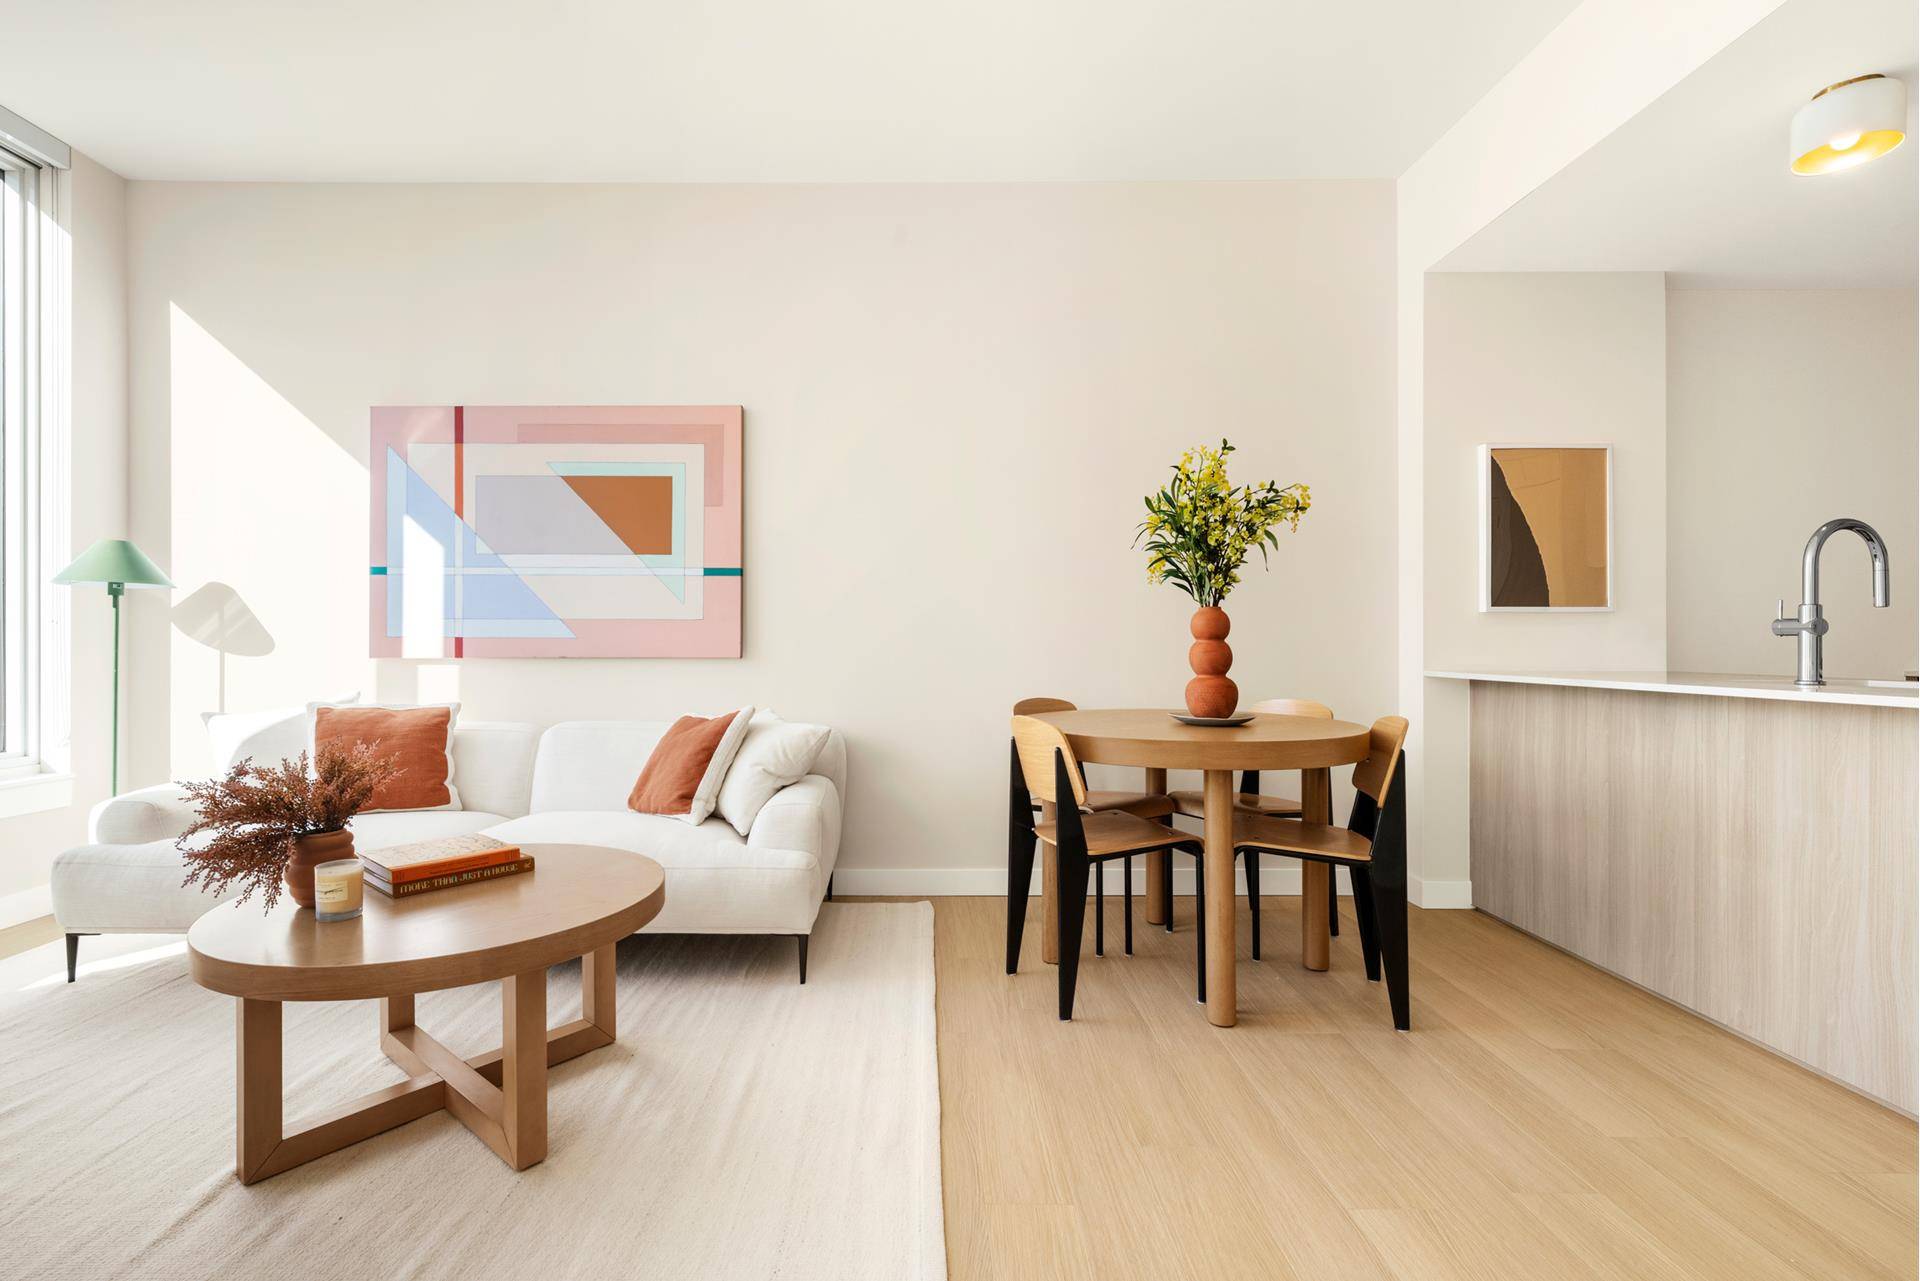 Offering 1 month OP. Now Leasing Artfully Designed Studio, 1, 2, and 3 Bedroom Residences.